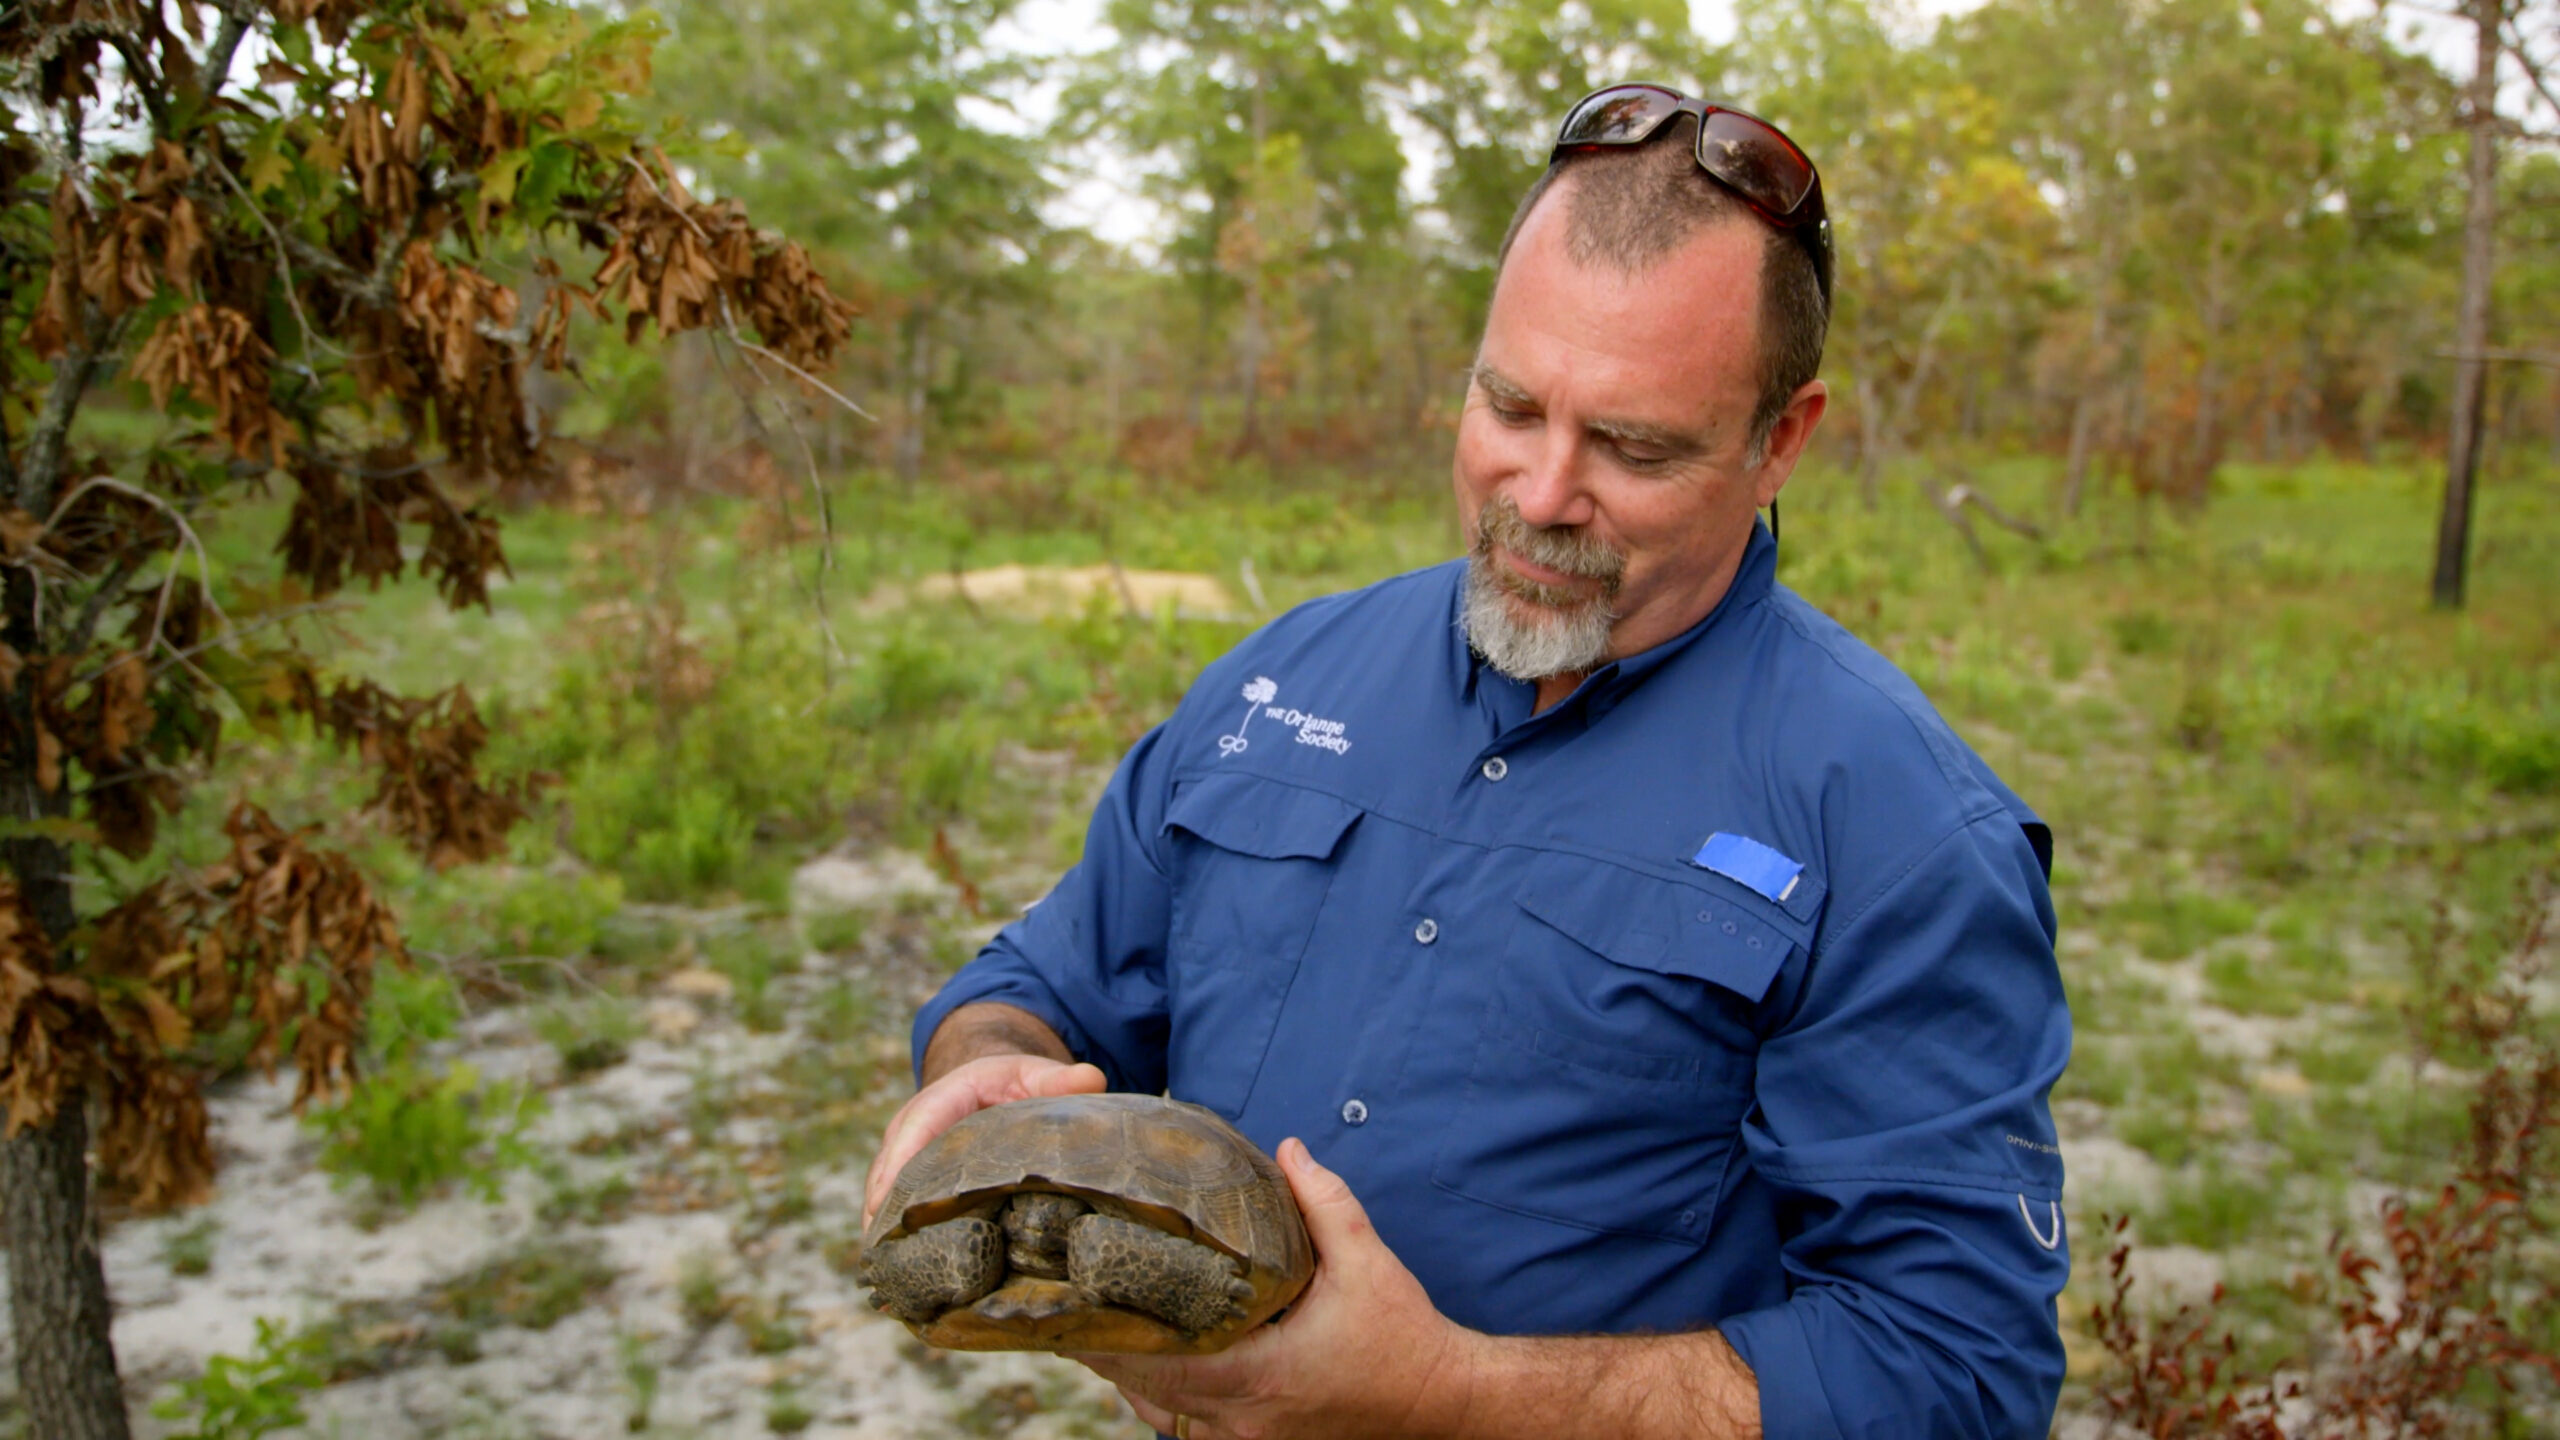 A man in a blue shirt looking down at a tortoise he is holding in his hands.